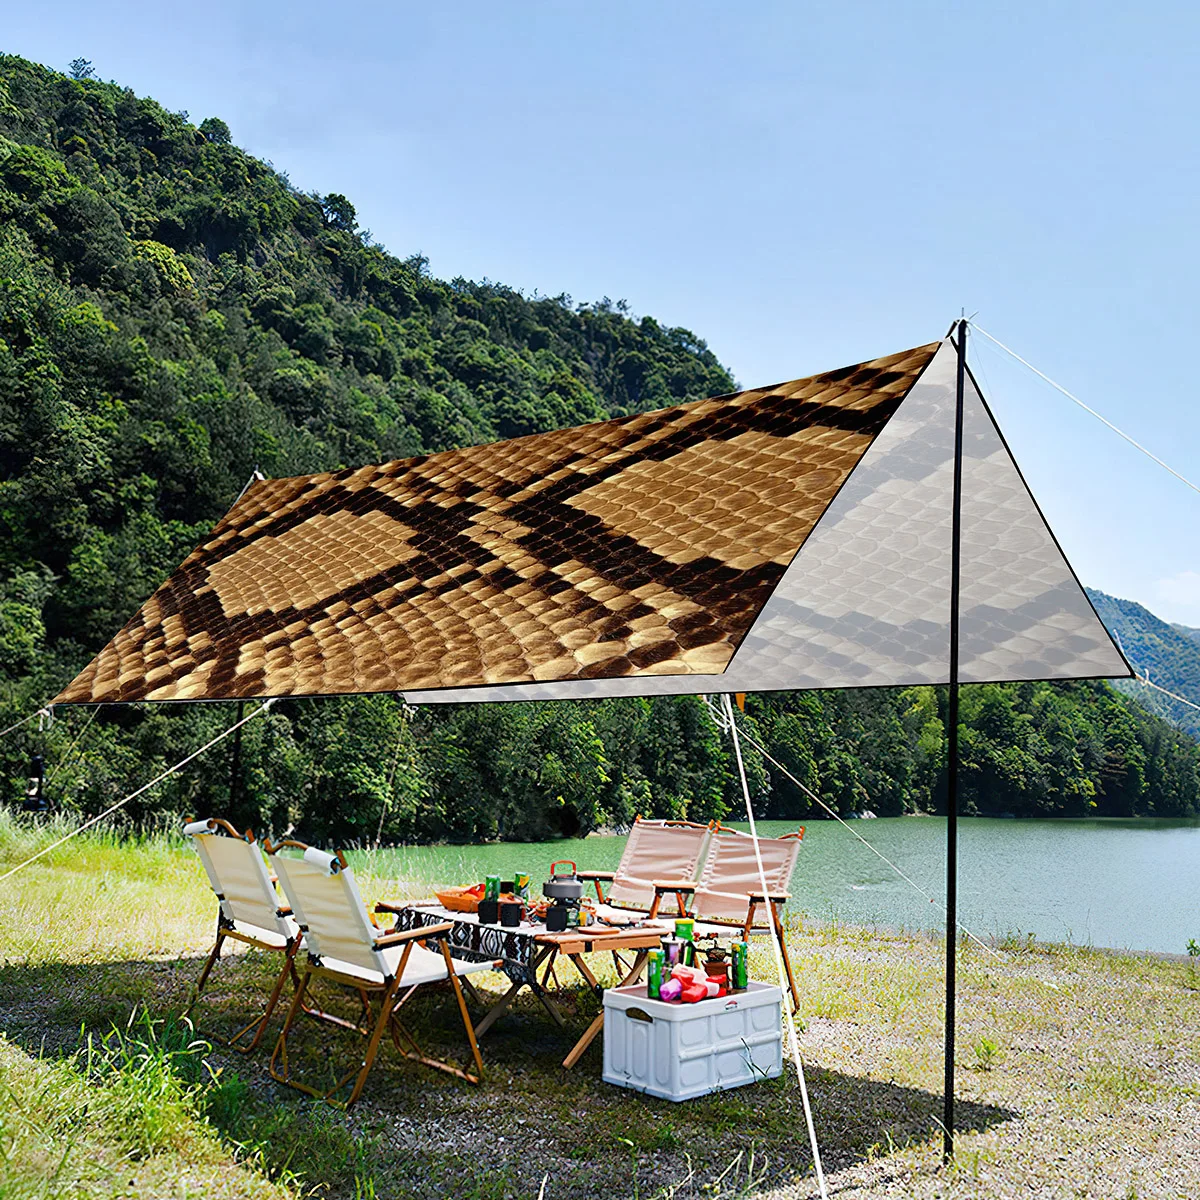 For Garden,waterproof And Uv Resistant Lightweight Portable Tent For Beach,picnic,music Festival